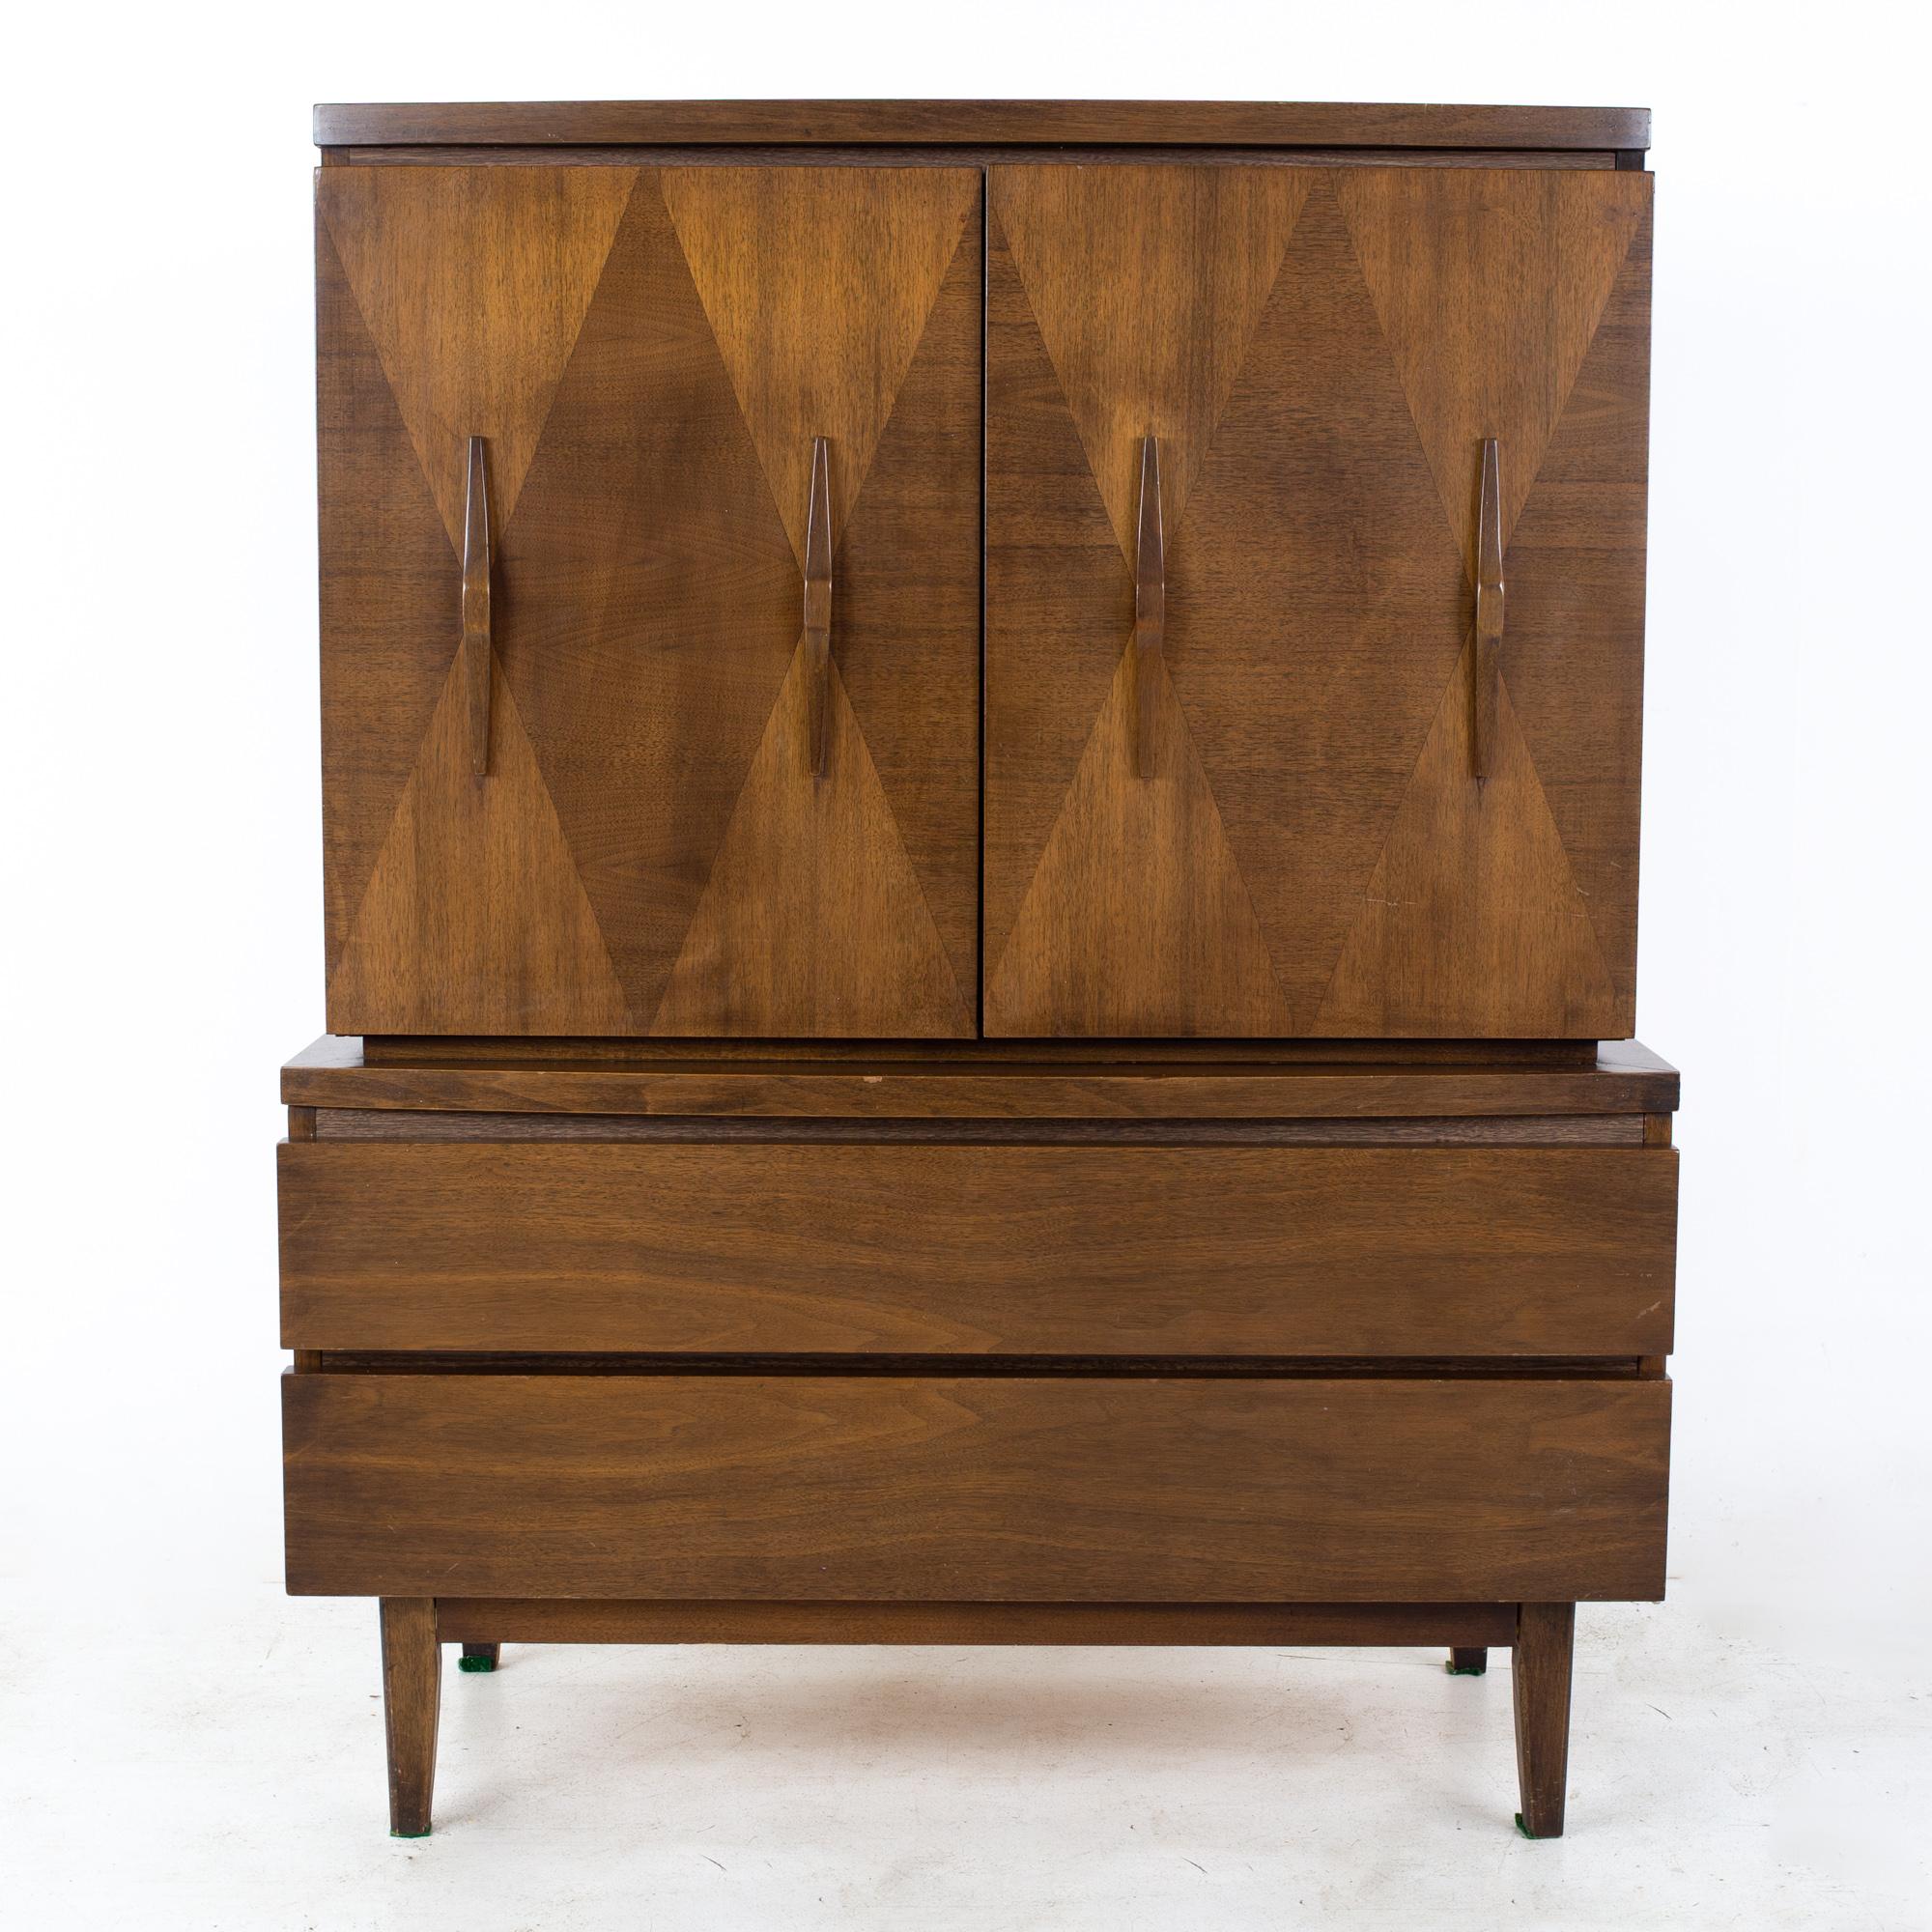 American of Martinsville mid century harlequin highboy armoire dresser
Highboy measures: 42 wide x 19 deep x 53 inches high

All pieces of furniture can be had in what we call restored vintage condition. That means the piece is restored upon